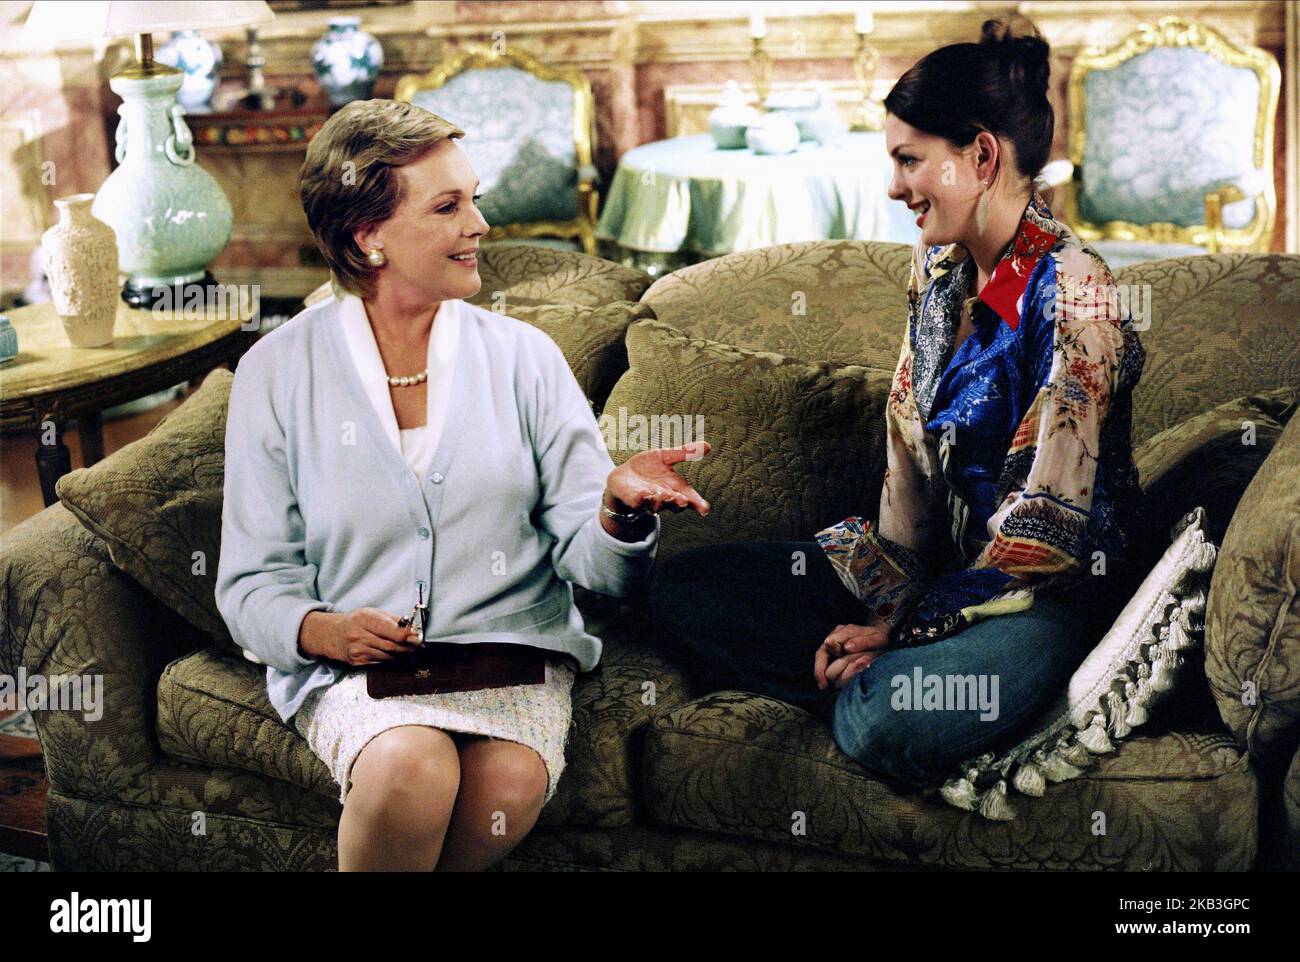 THE PRINCESS DIARIES 2: ROYAL ENGAGEMENT, JULIE ANDREWS, ANNE HATHAWAY, 2004 Foto Stock